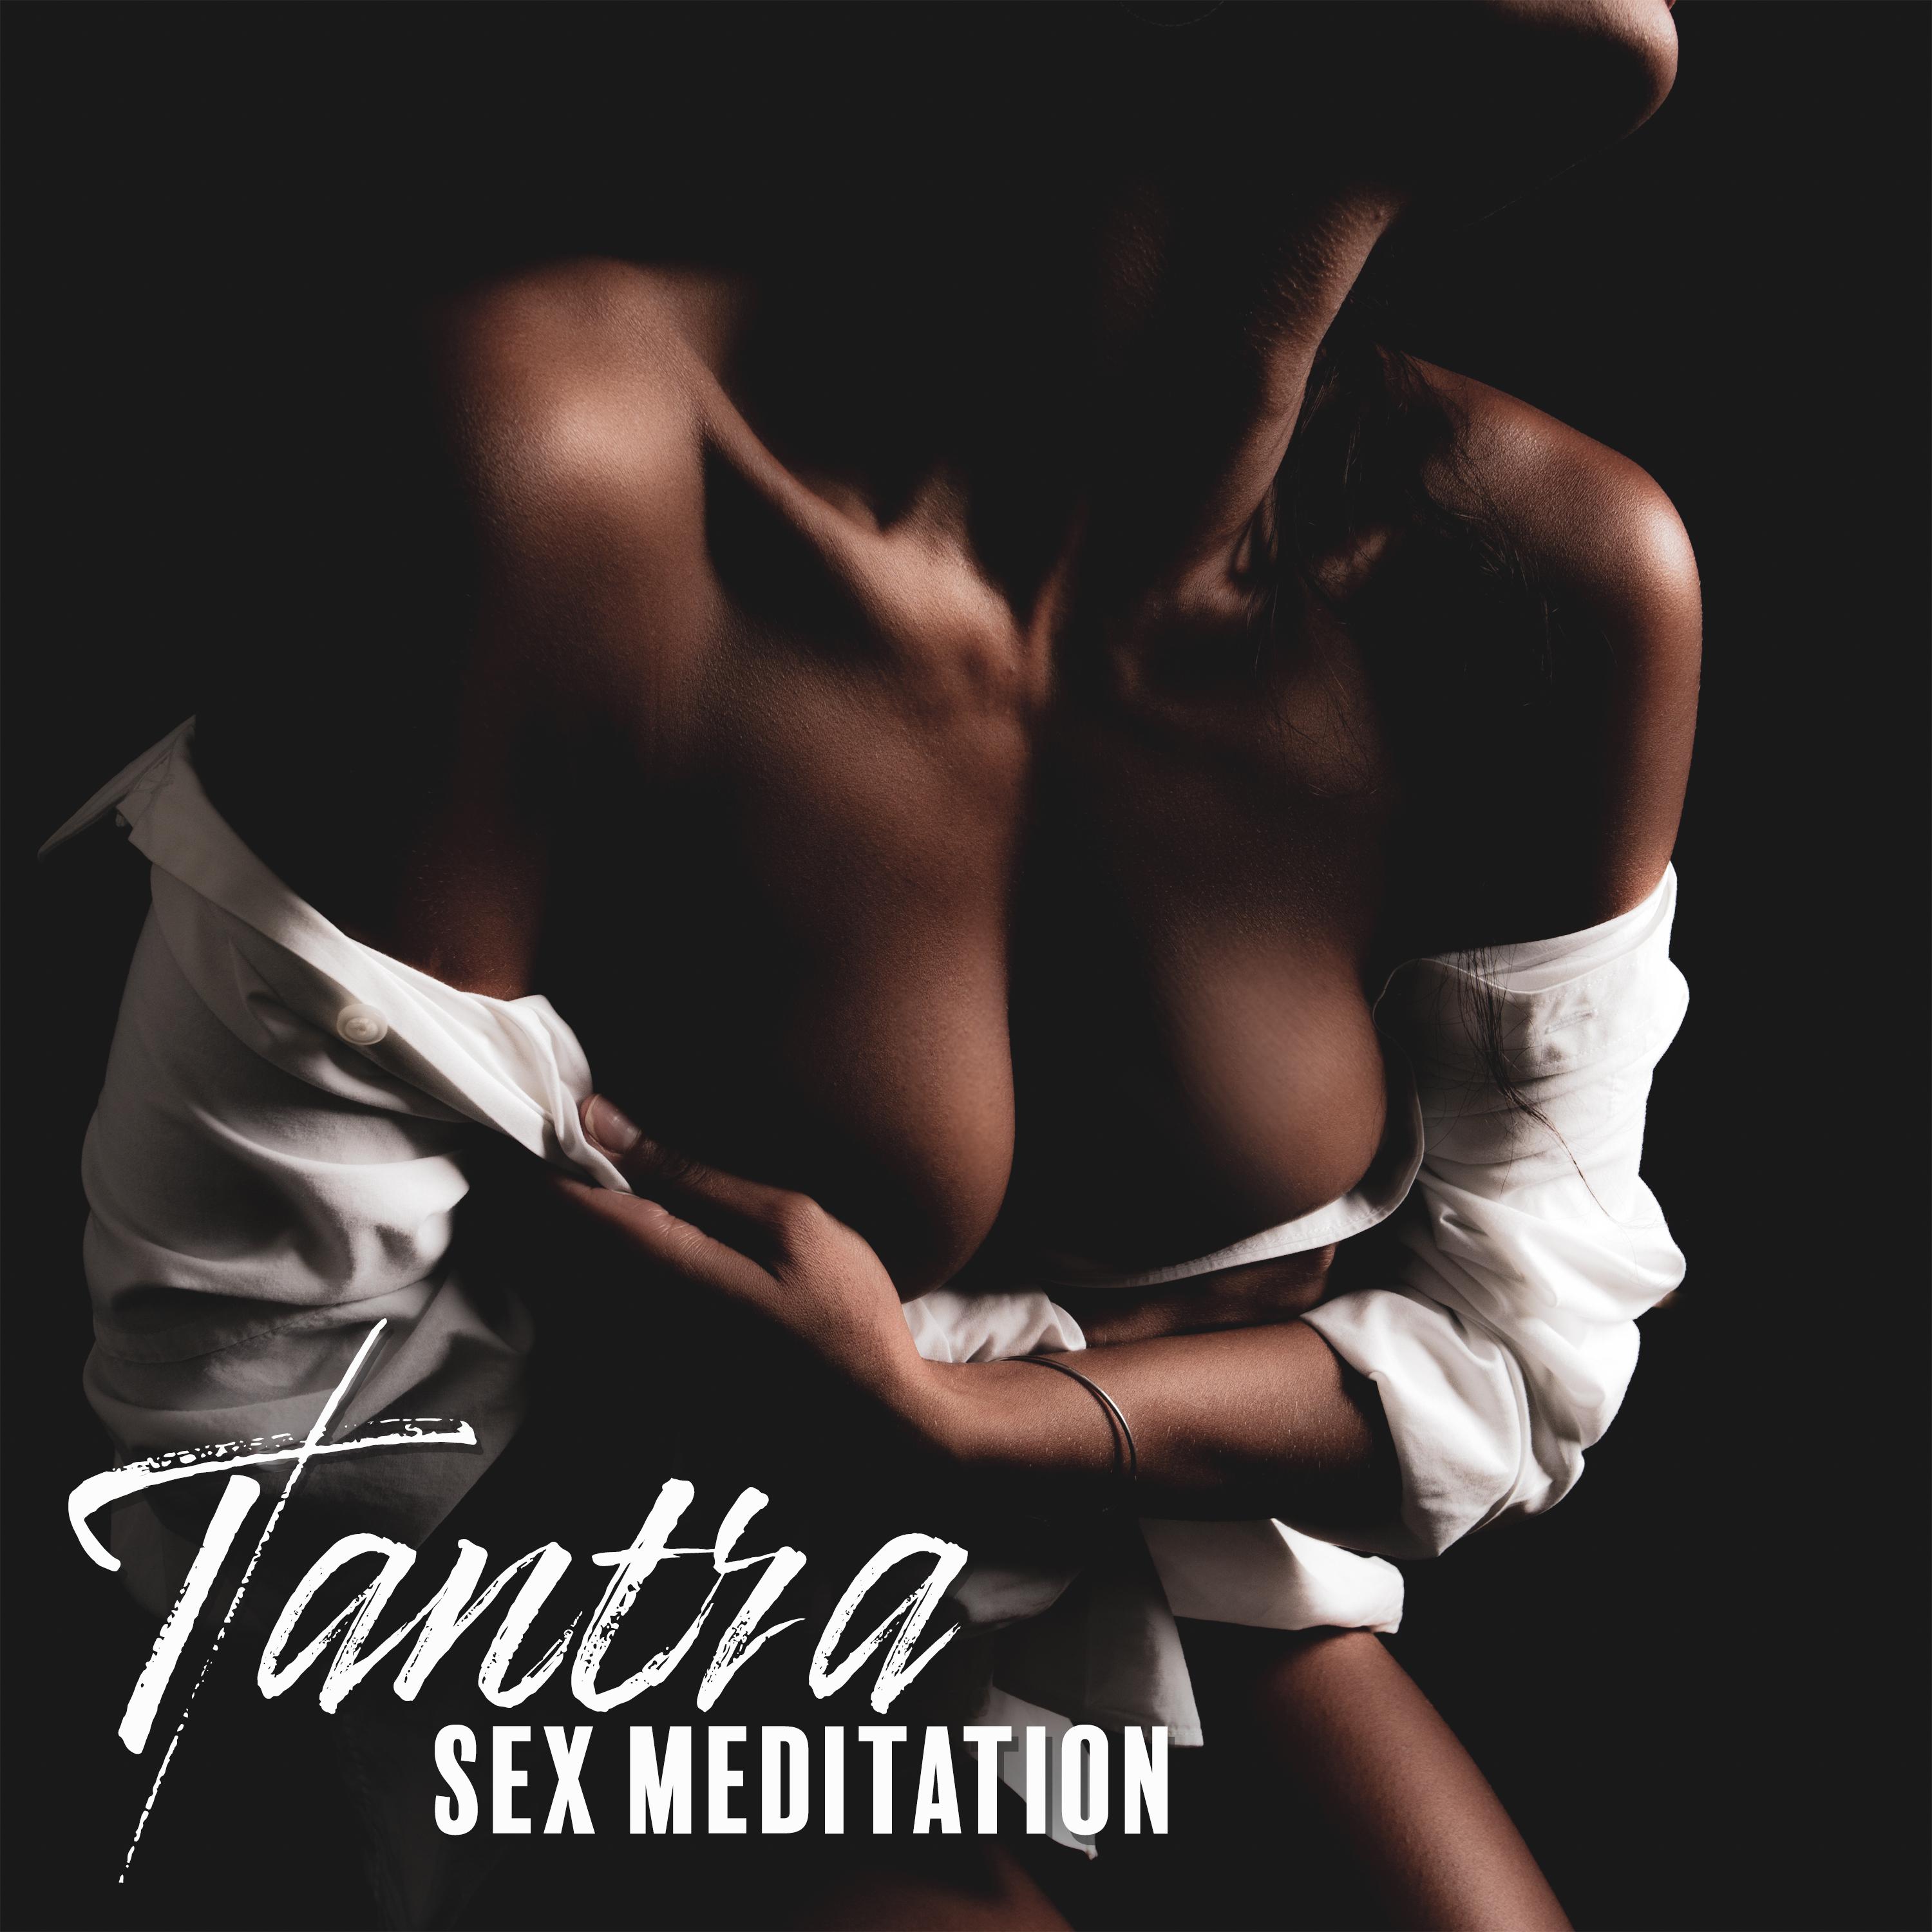 Tantra *** Meditation (Sensual Music for Relax Your Body & Mind, **** Yoga, Deep Massage, Erotic Voices Kamasutra Lounge)